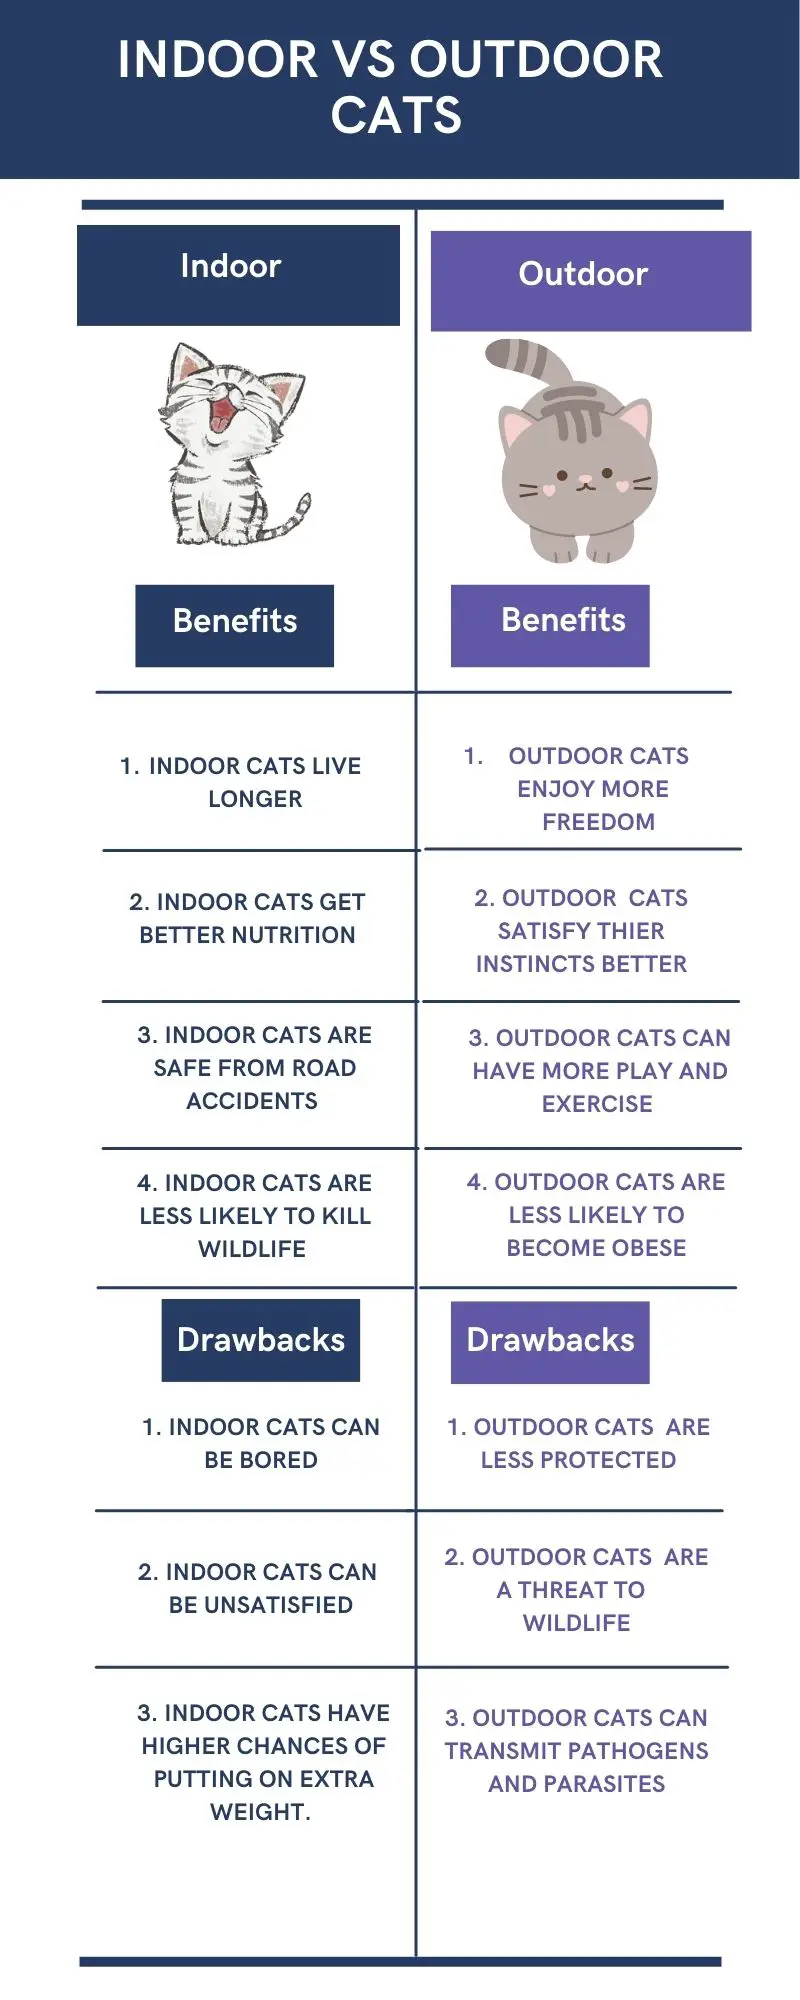 Indoor vs outdoor cats. This infographic compares the benefits and drawbacks of indoor and outdoor cats